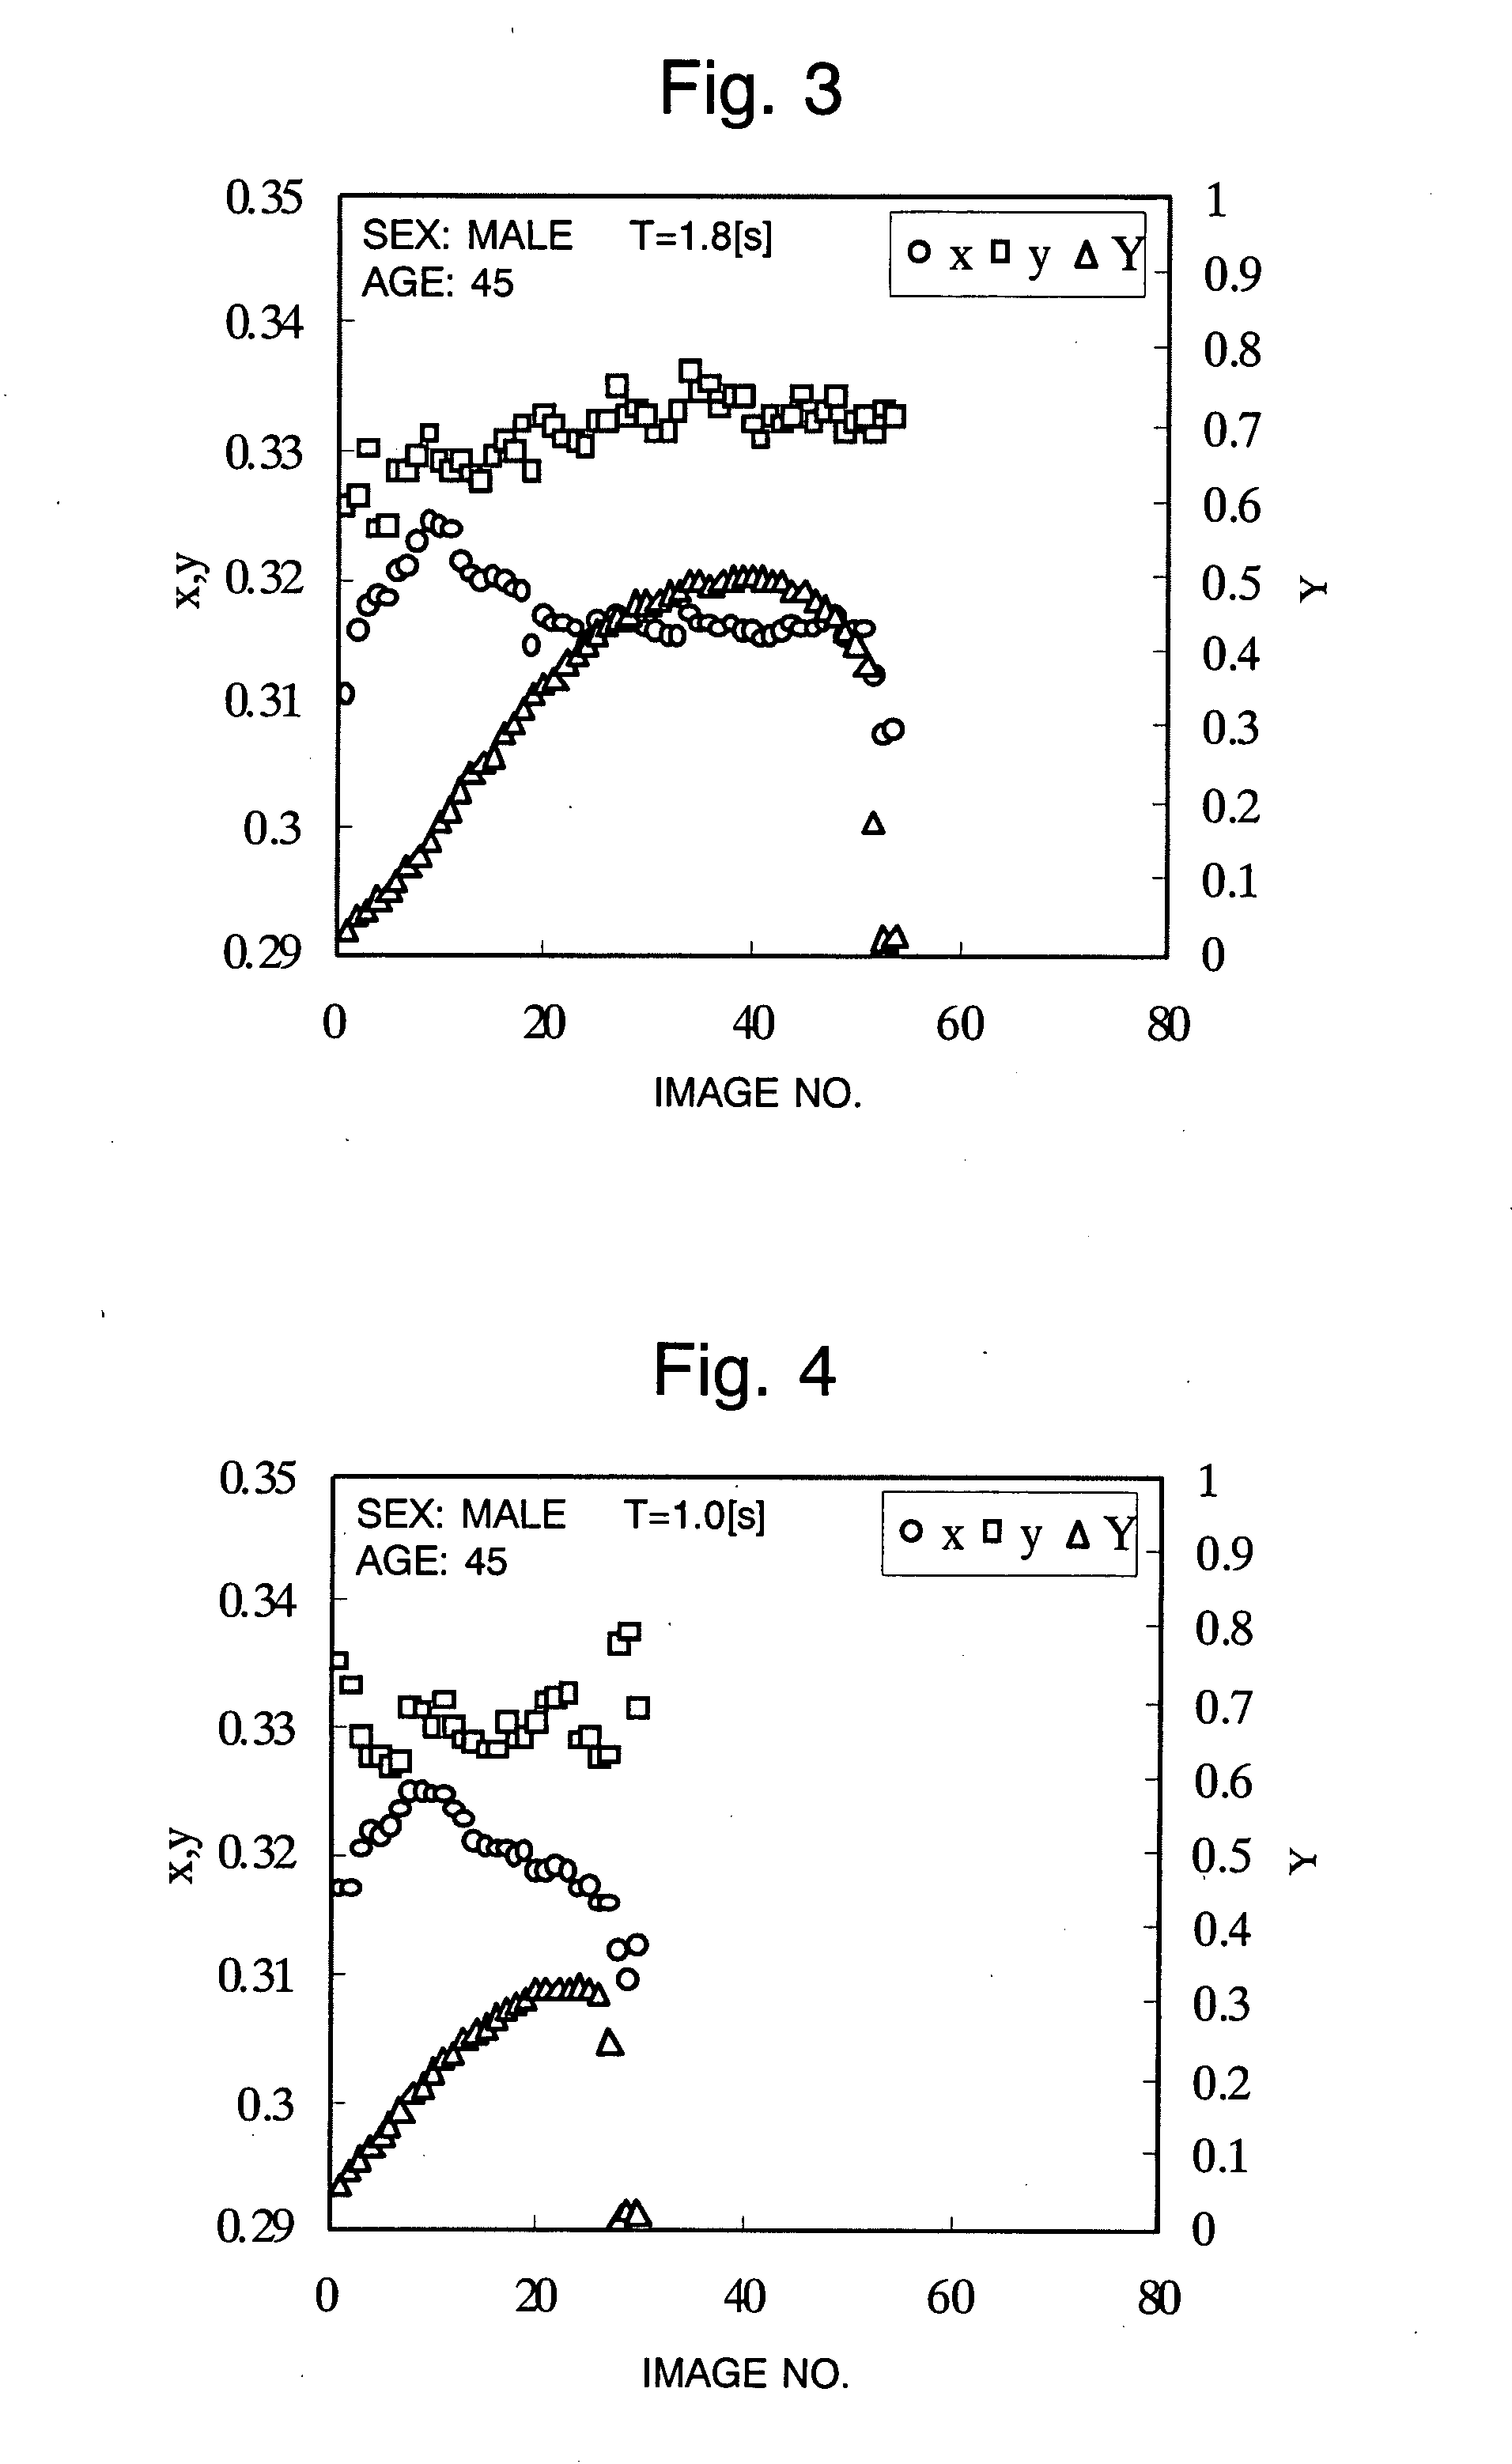 Method And System For Extracting Liveliness Information From Fingertip